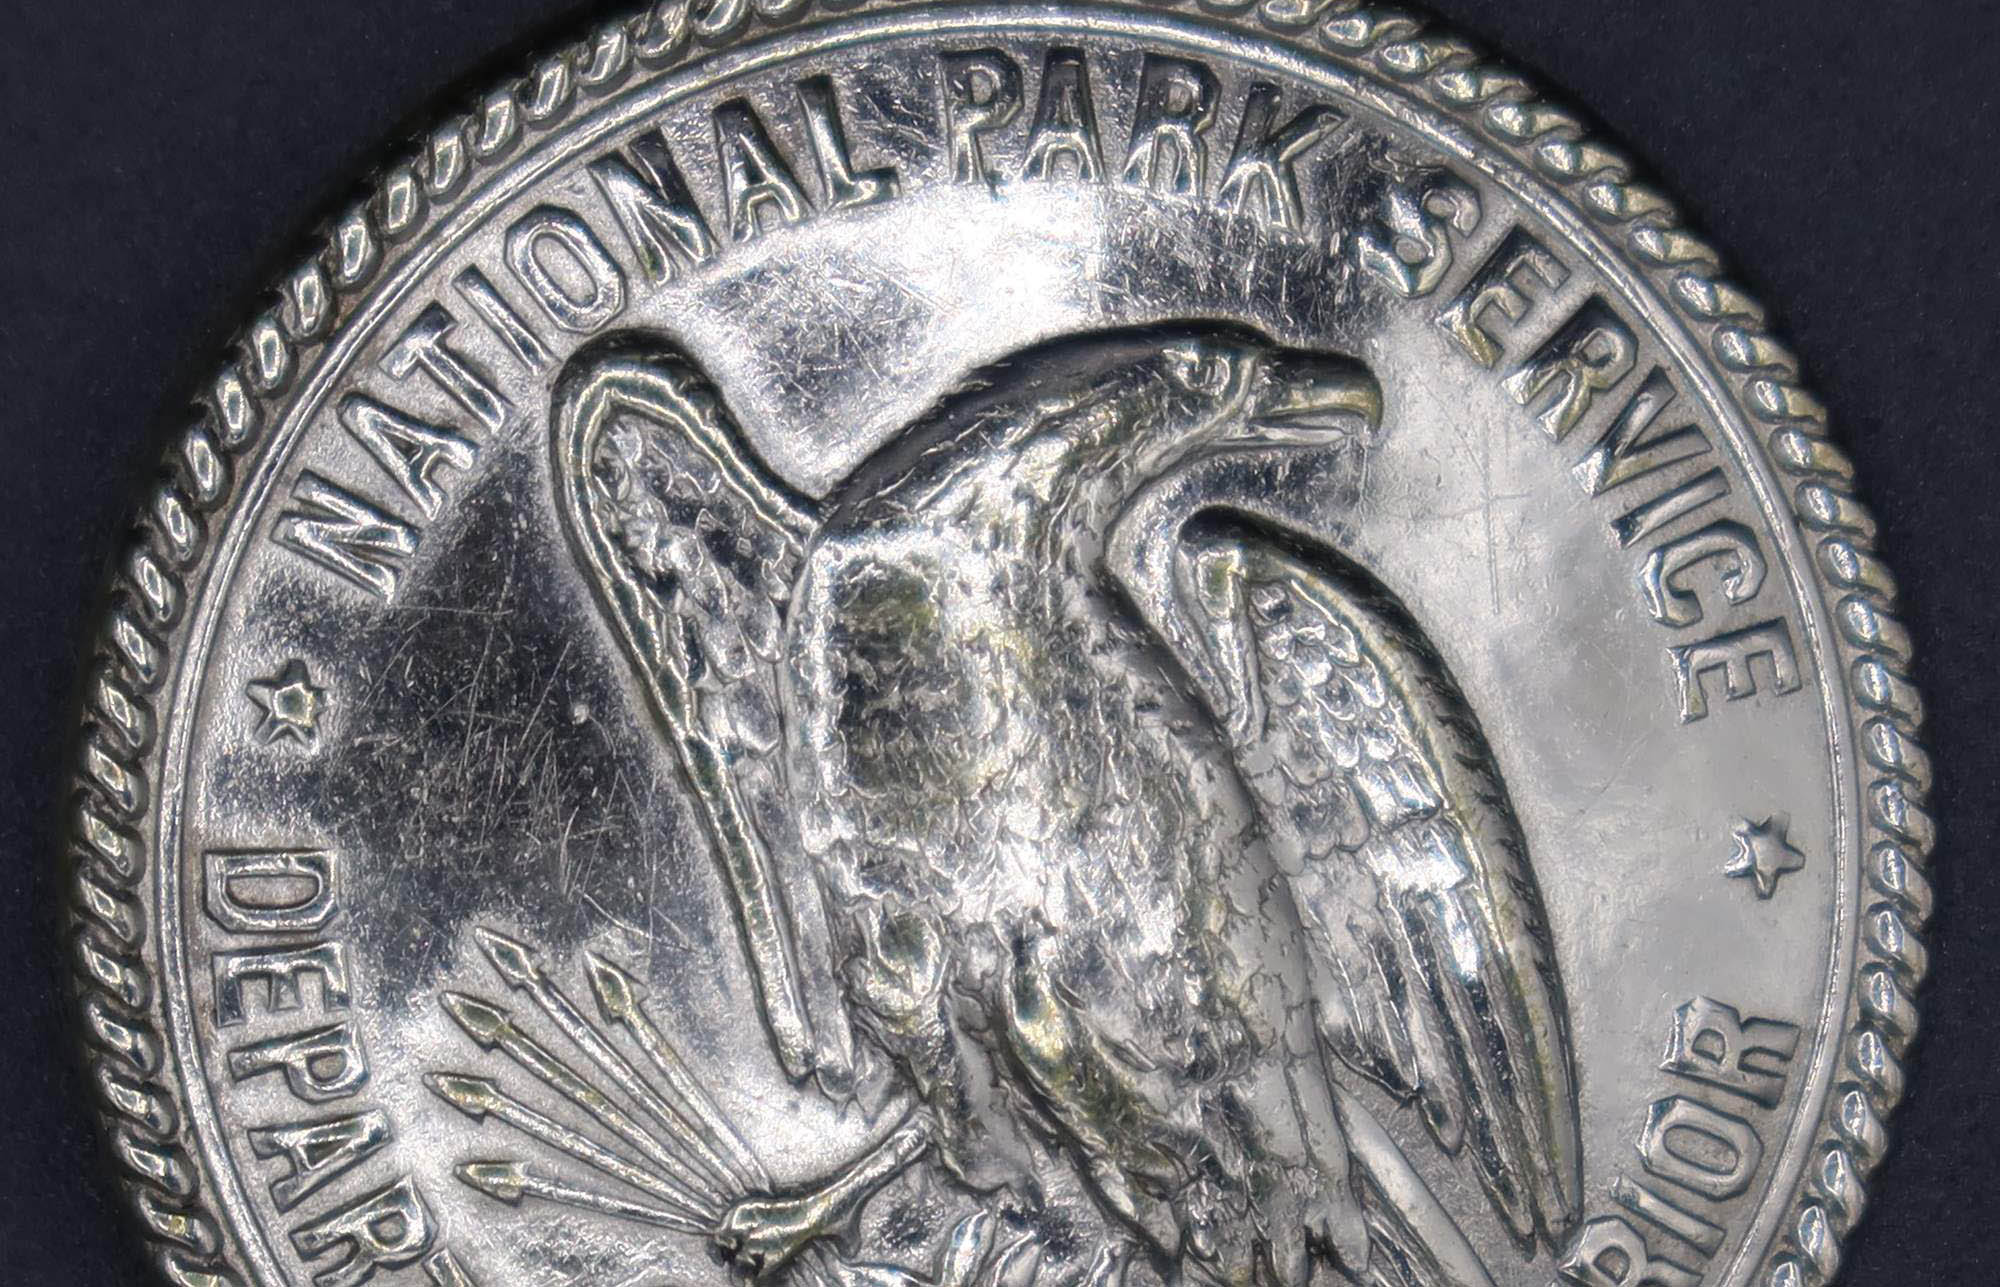 Round silver badge with an eagle in the middle center, marked National Park Service, Department of the Interior. 